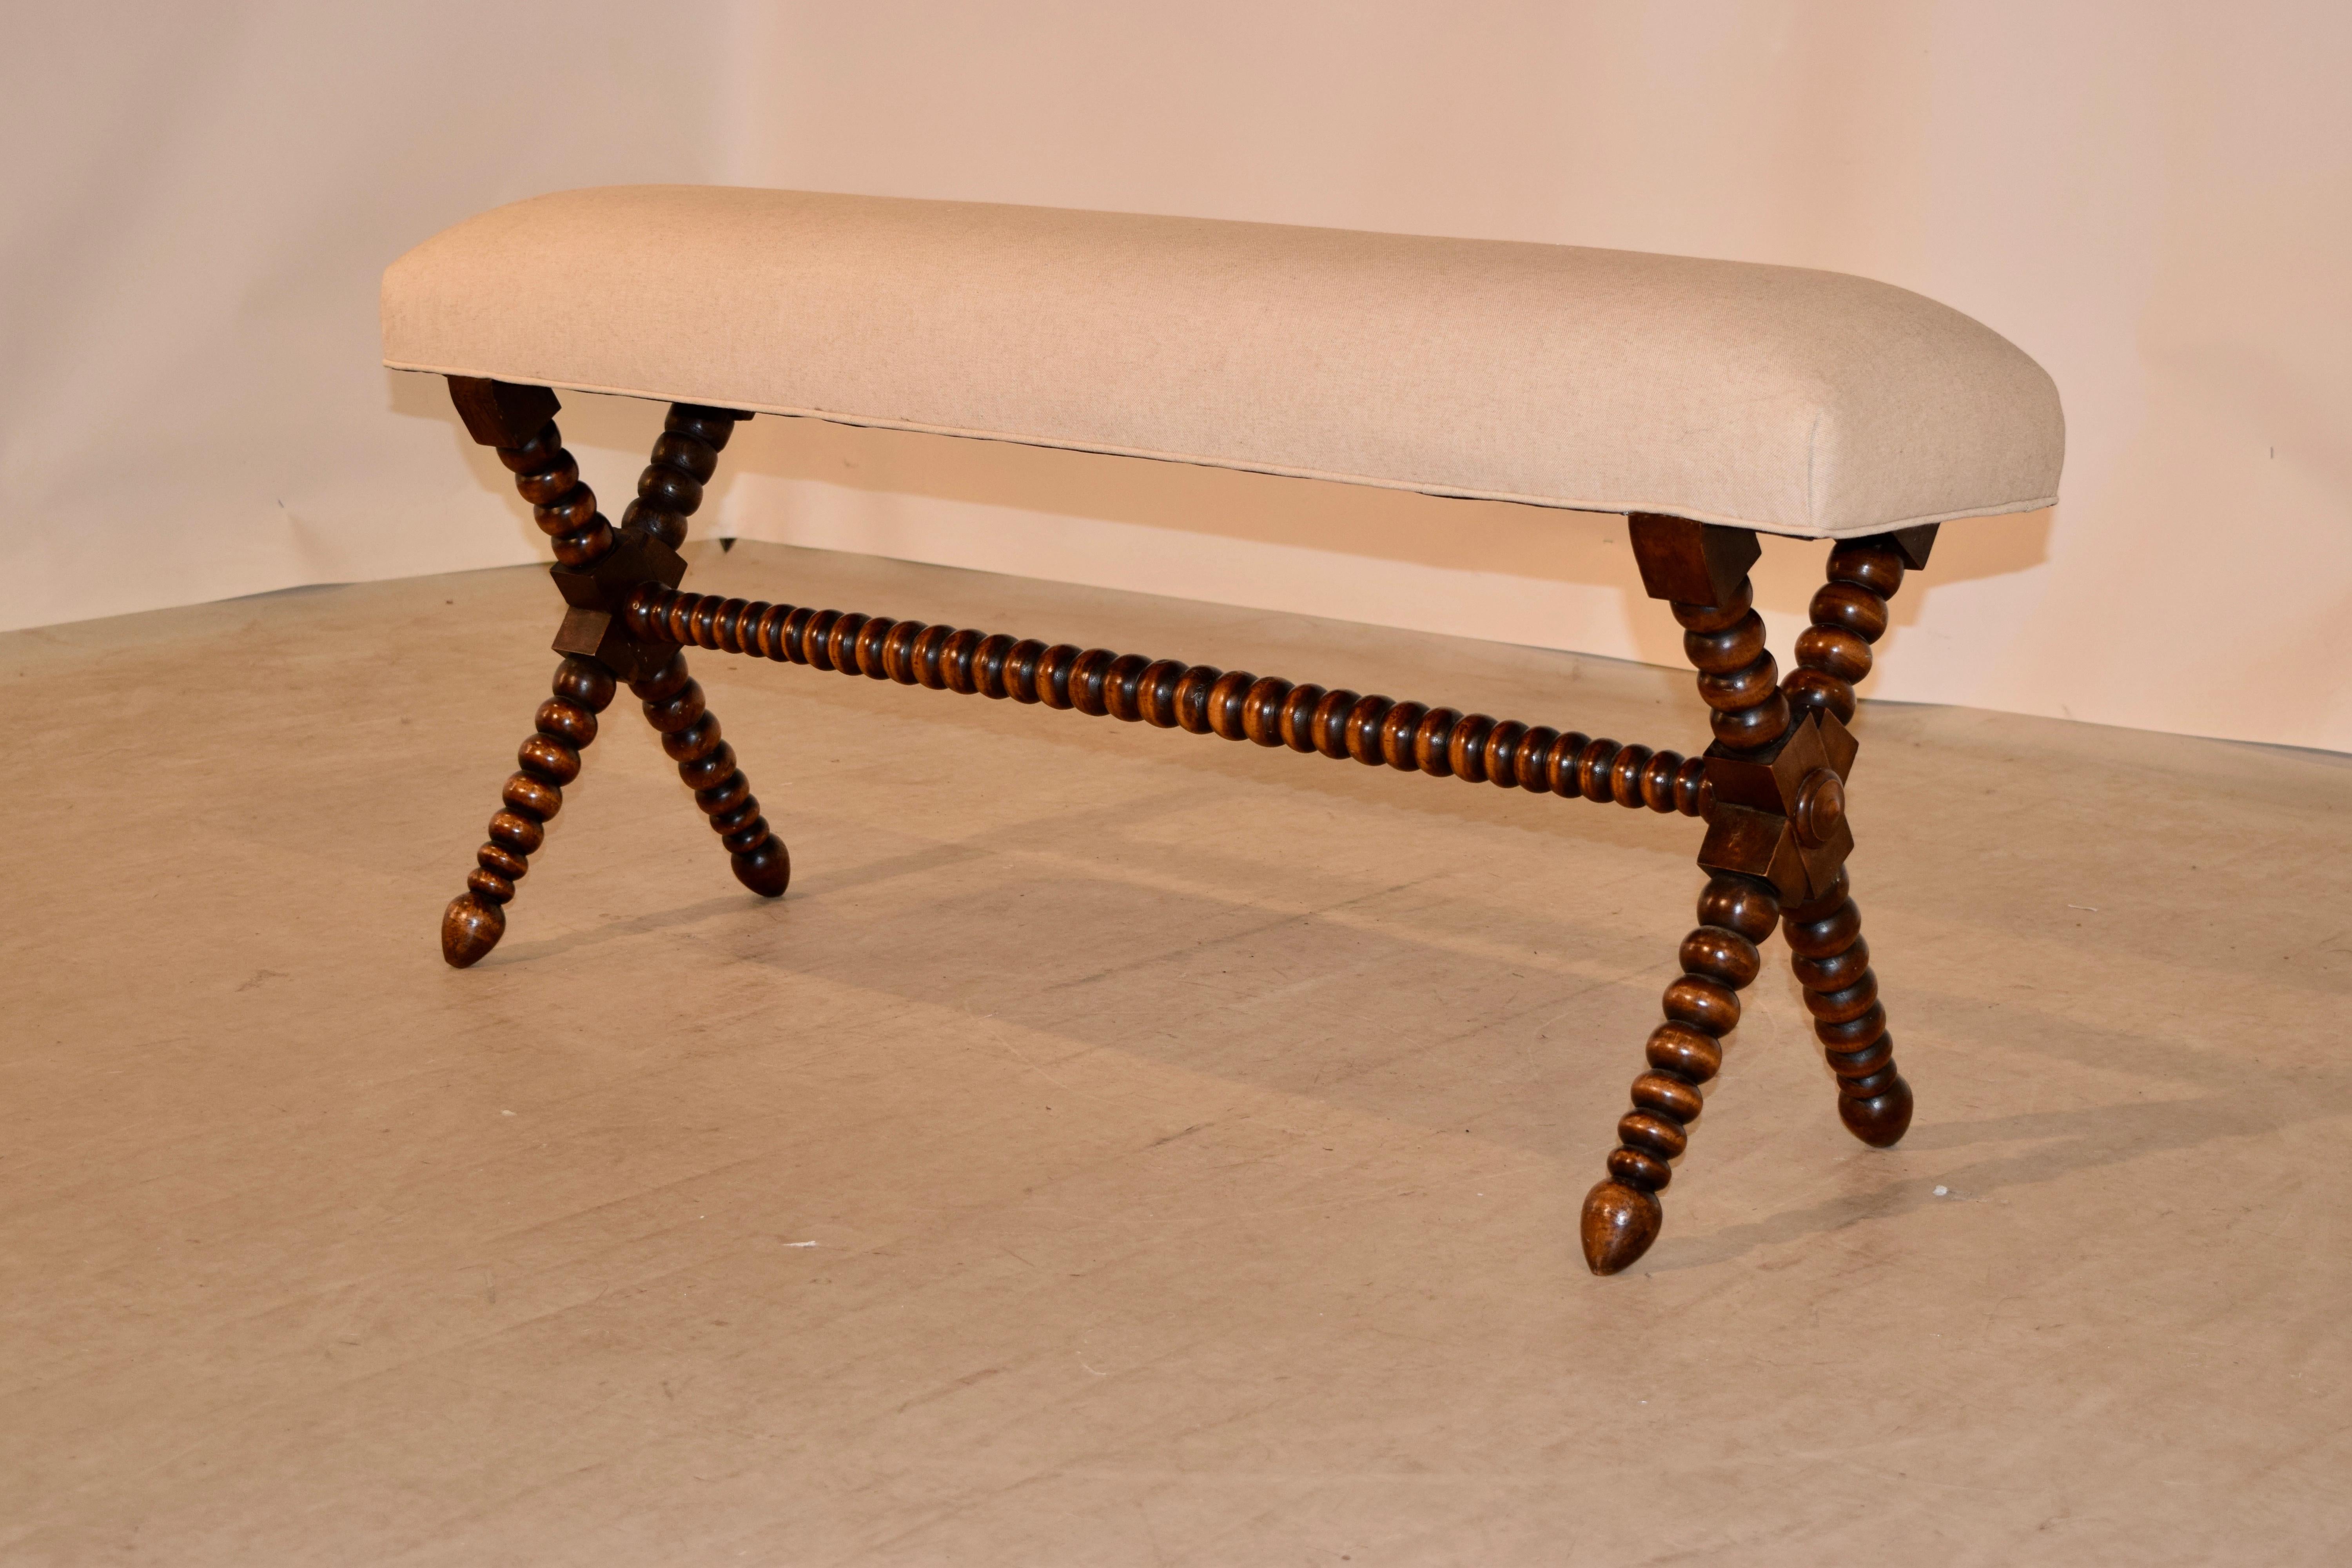 19th century mahogany bench from France with a newly upholstered linen seat supported on a frame with hand turned x-stretcher legs. Seat measures 11.25 inches deep.